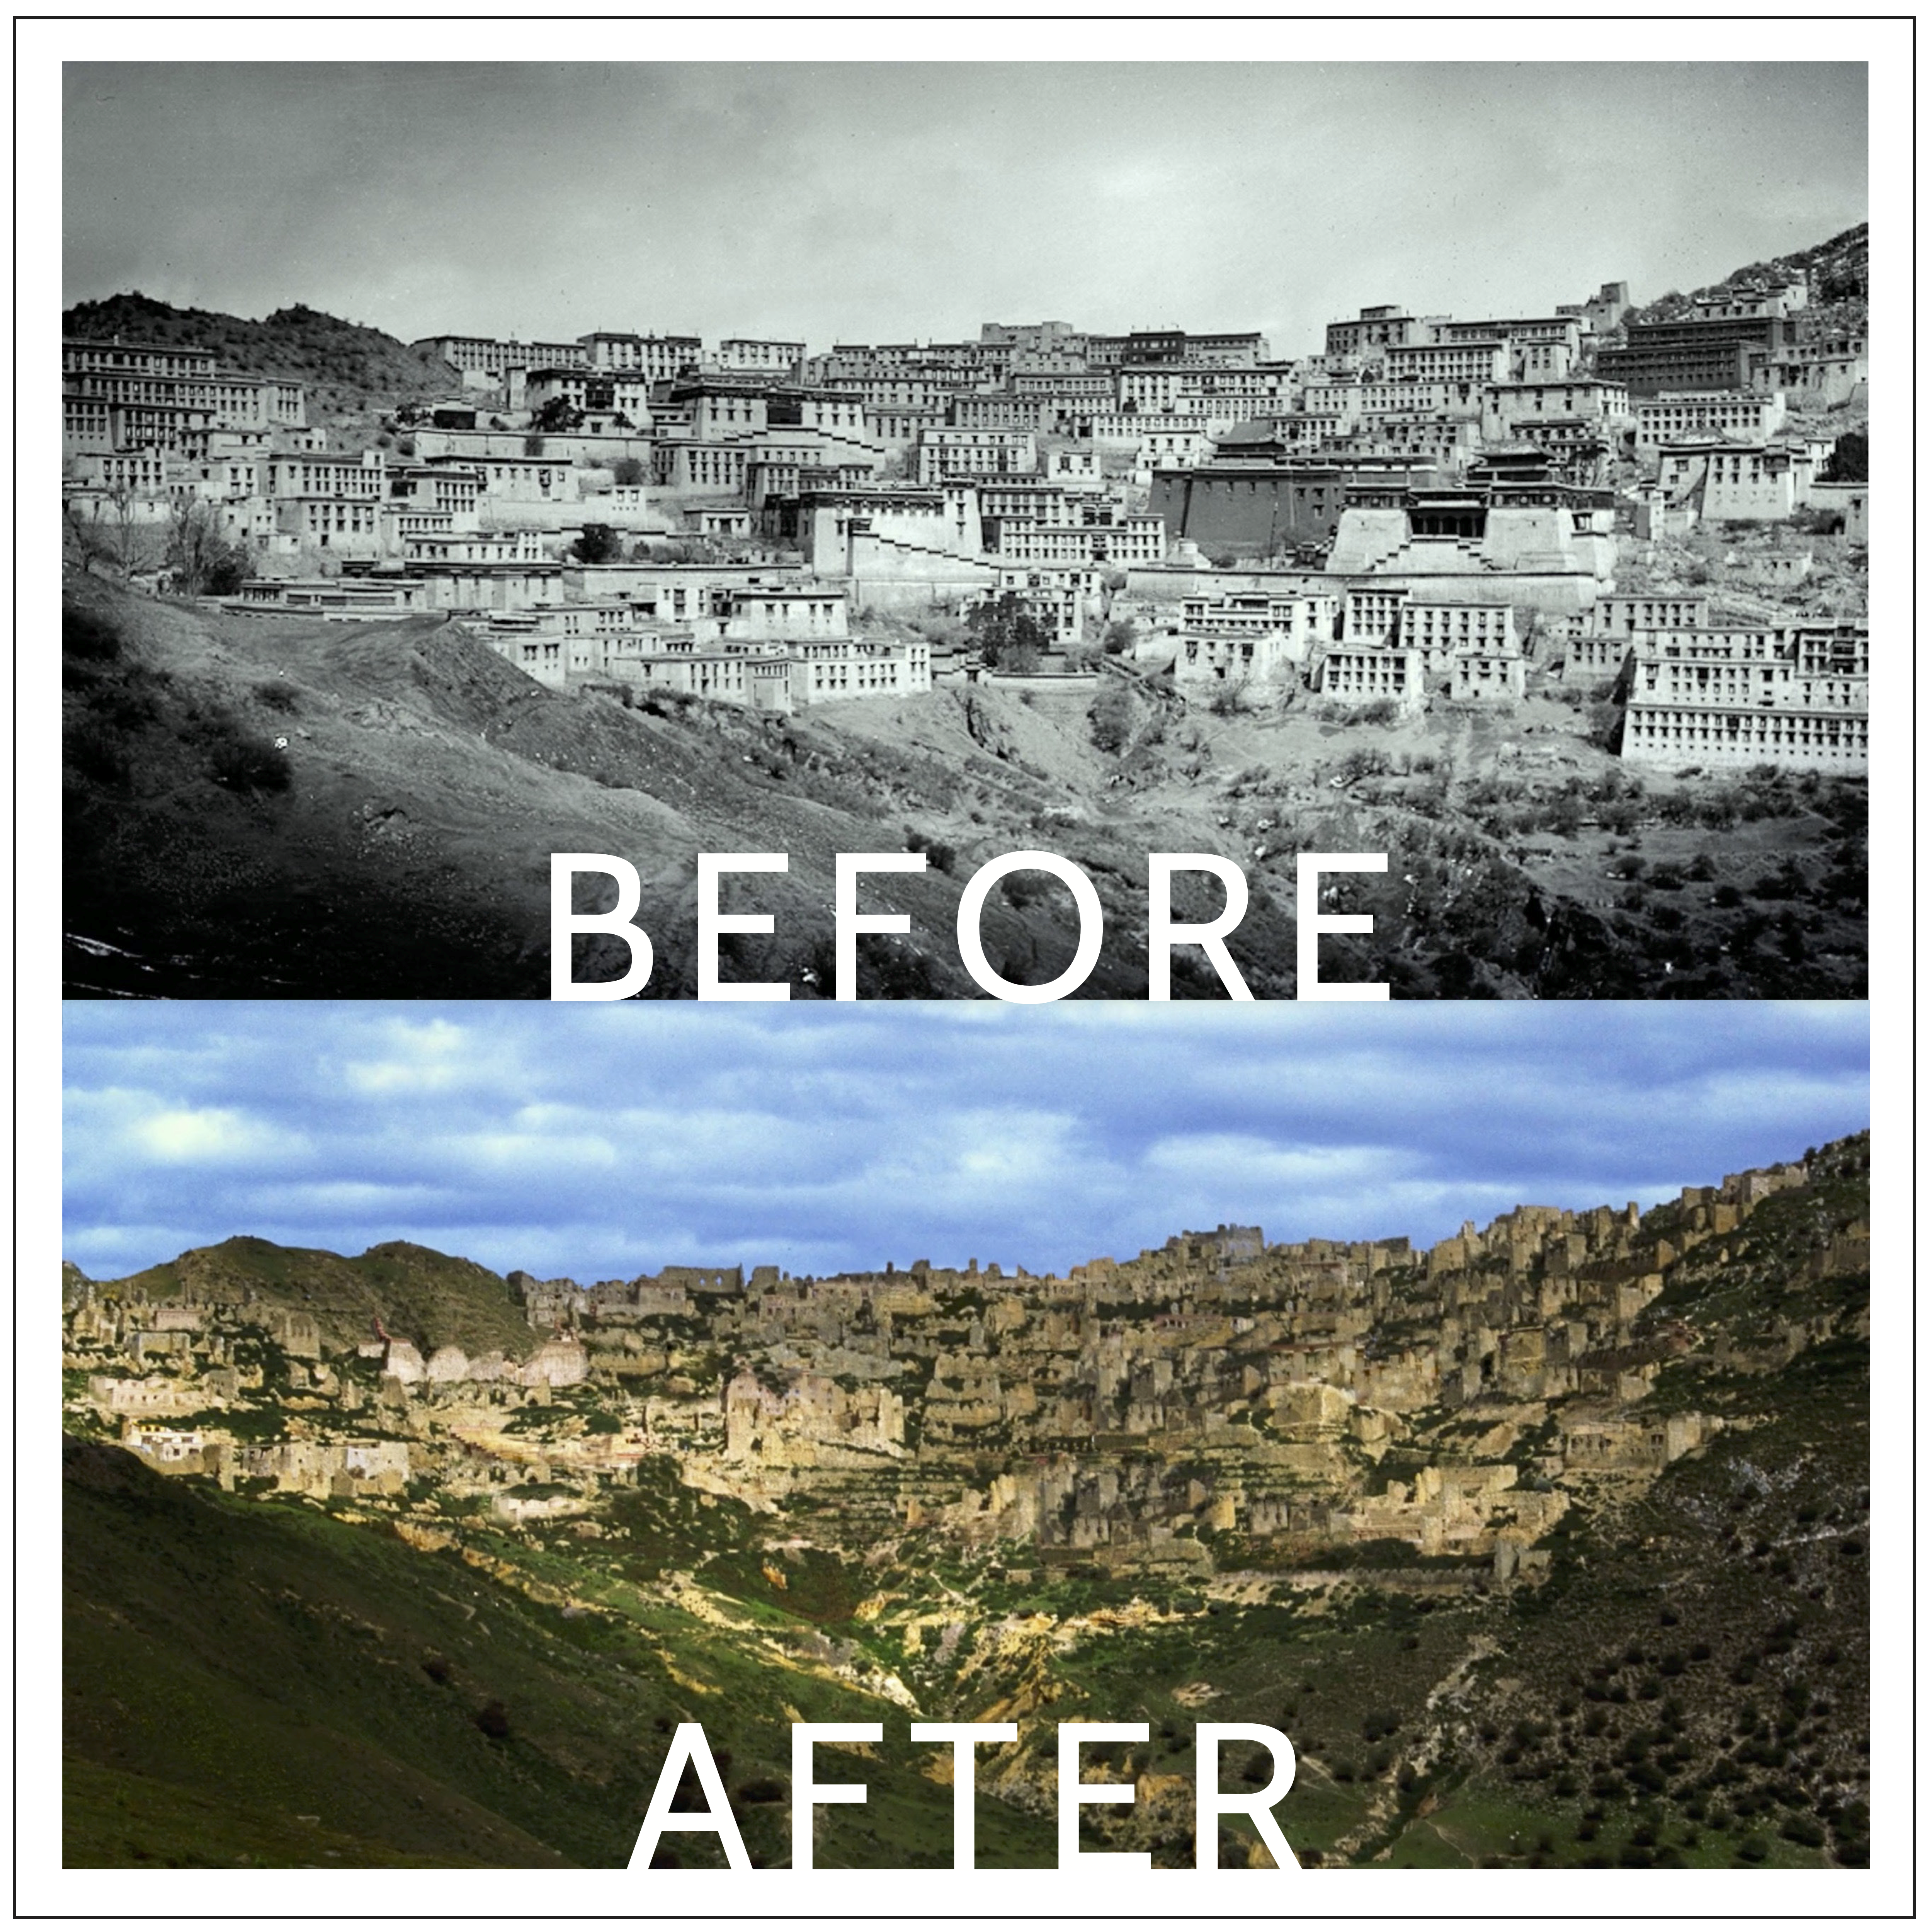 Ganden Monastery near Lhasa, before and after invasion of Tibet